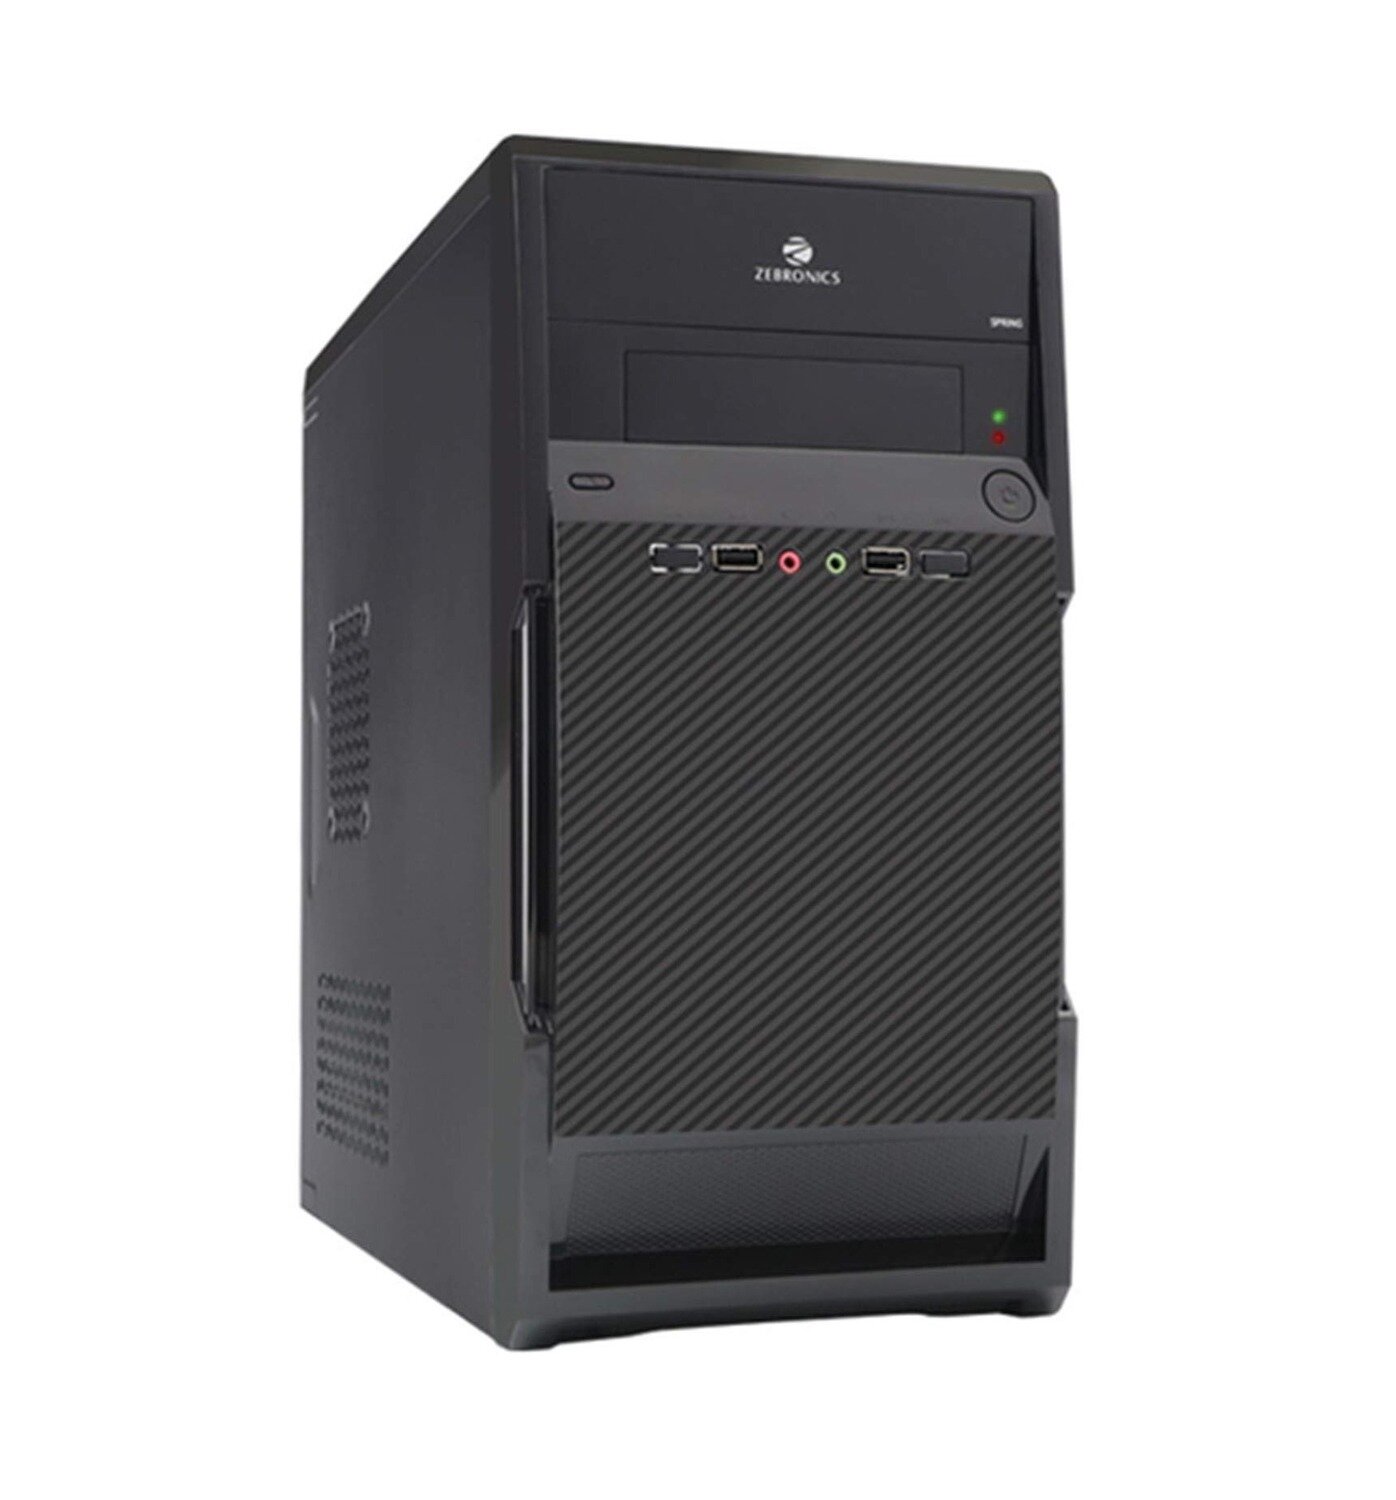 Core I5-650 3.2Ghz Desktop PC for Home & Office - 8GB RAM / 240GB SSD